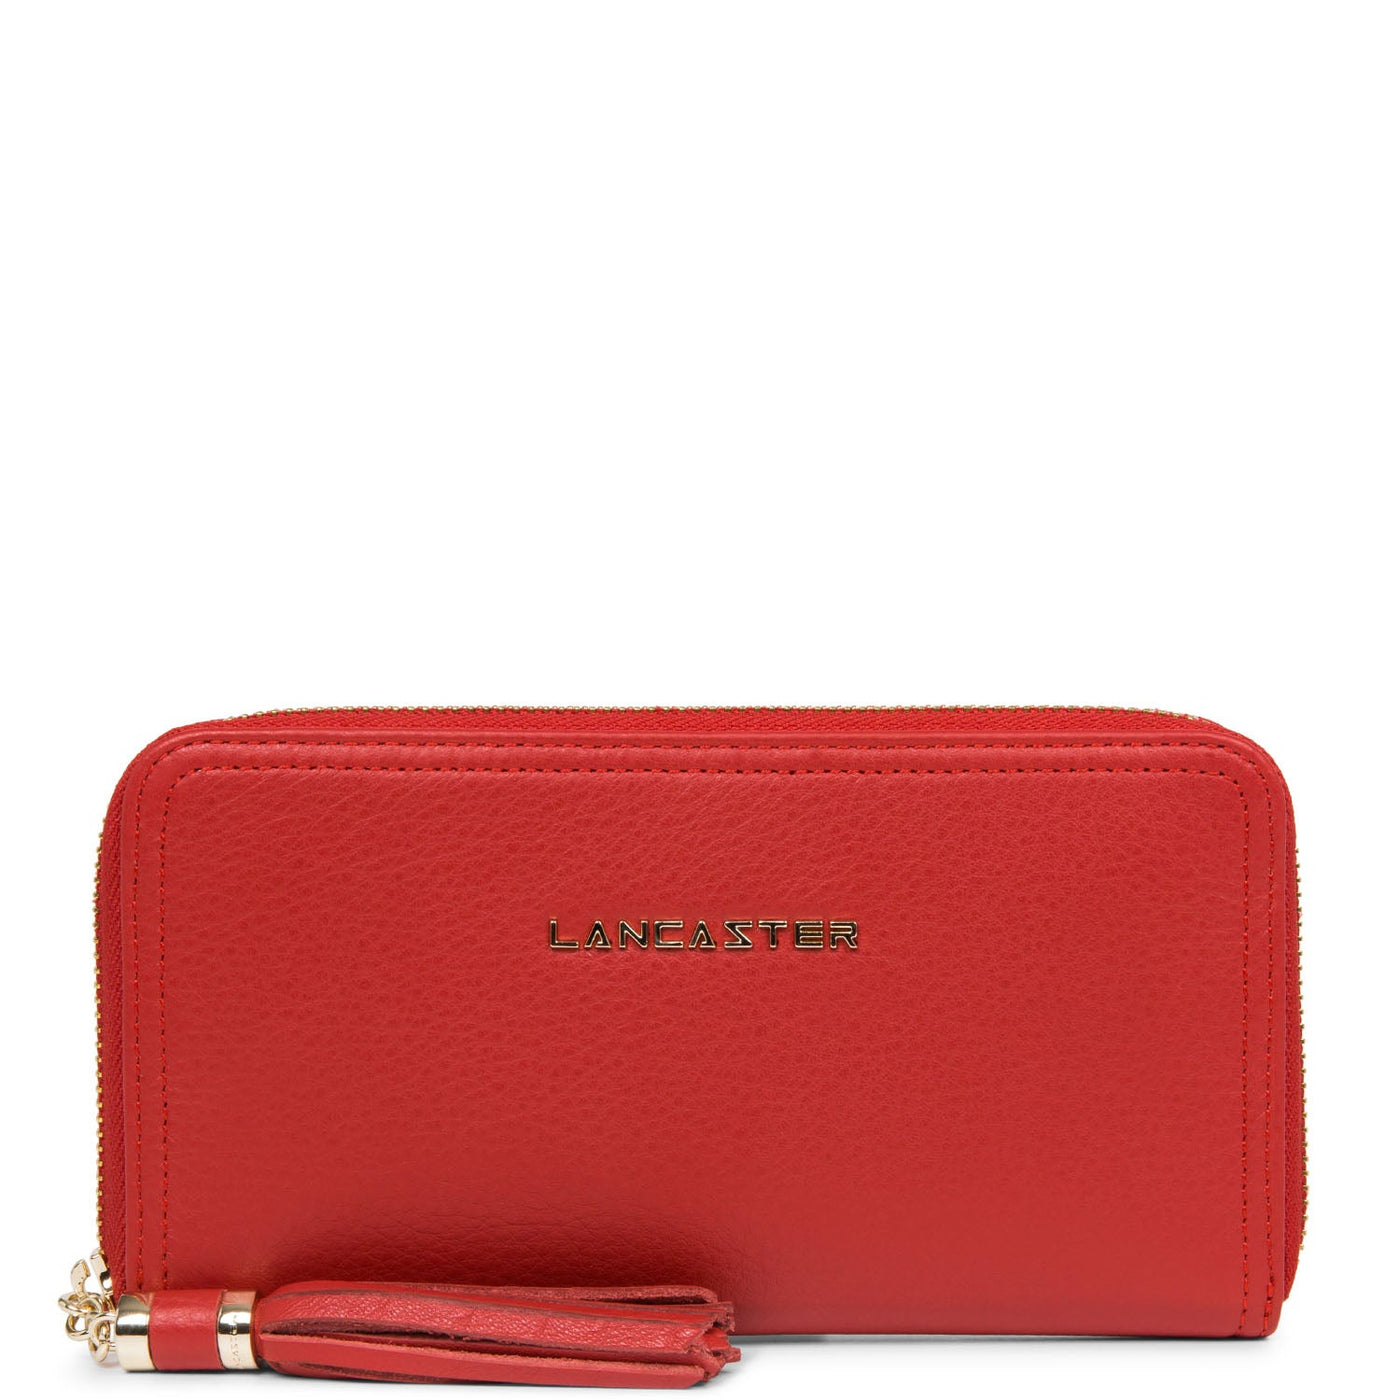 organizer wallet - mademoiselle ana #couleur_rouge